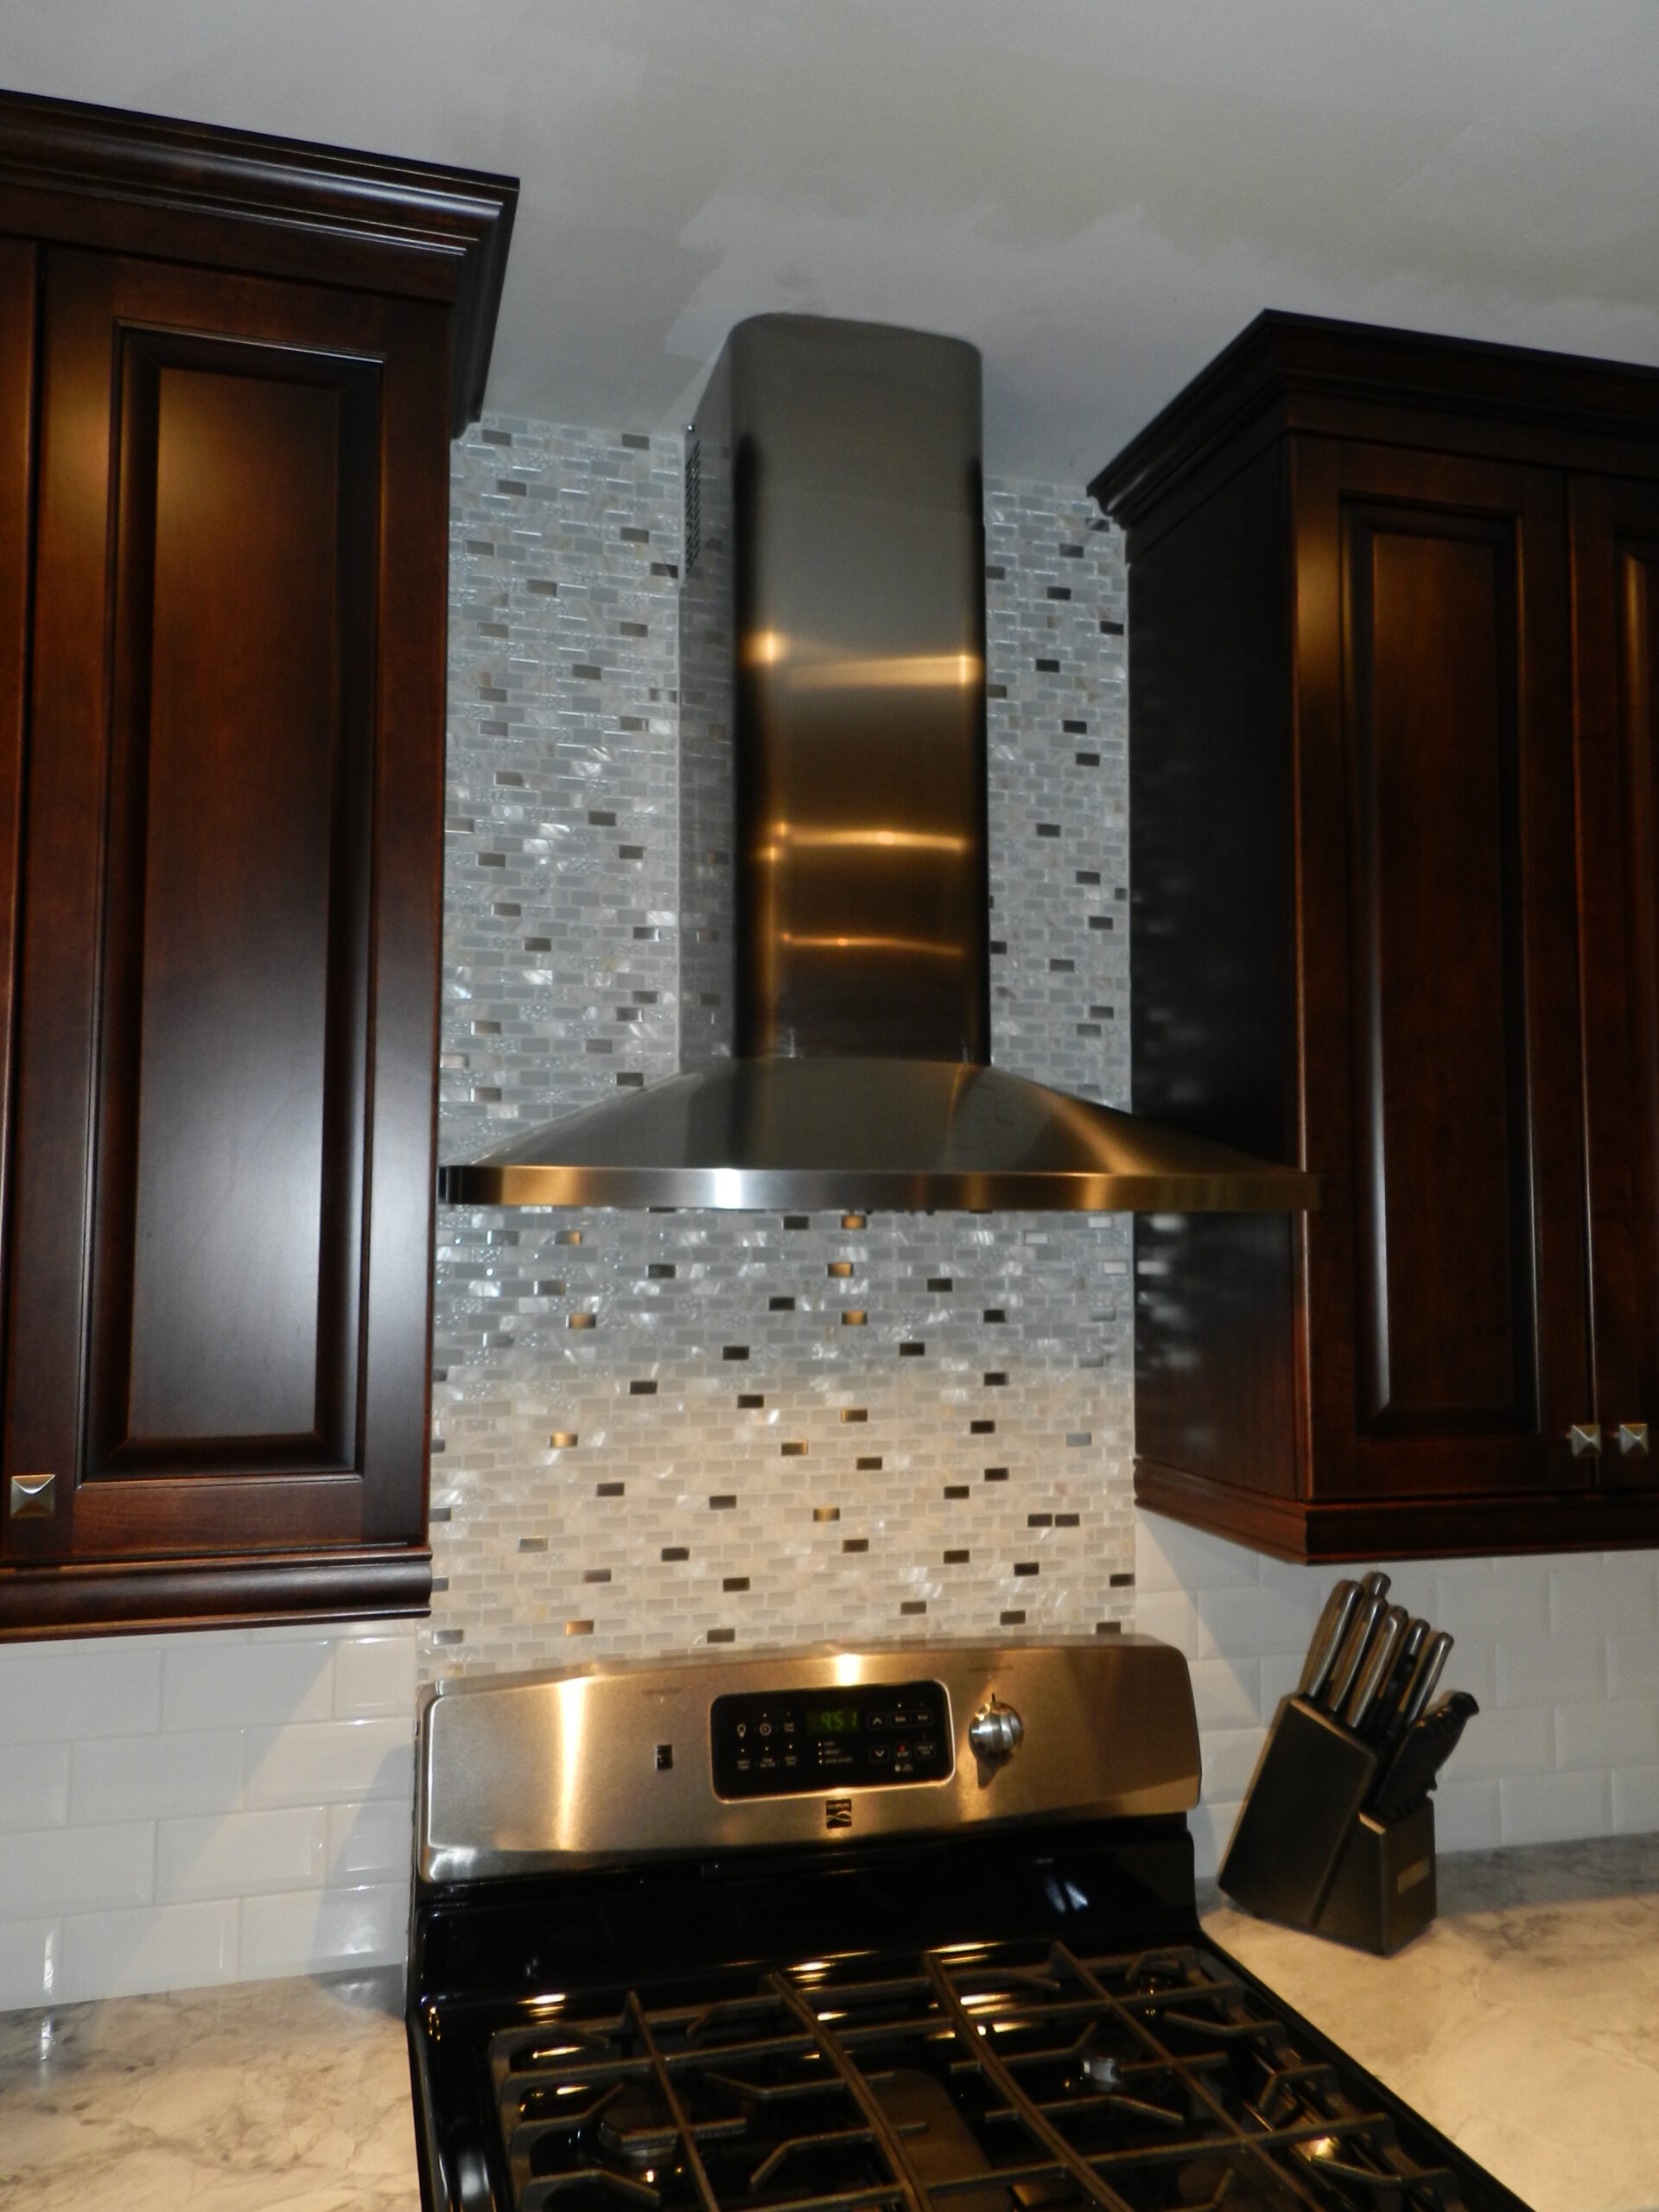 decorative backsplash behind range and countertops in kitchen | GMD Surfaces in Chicagoland and Northwest Indiana